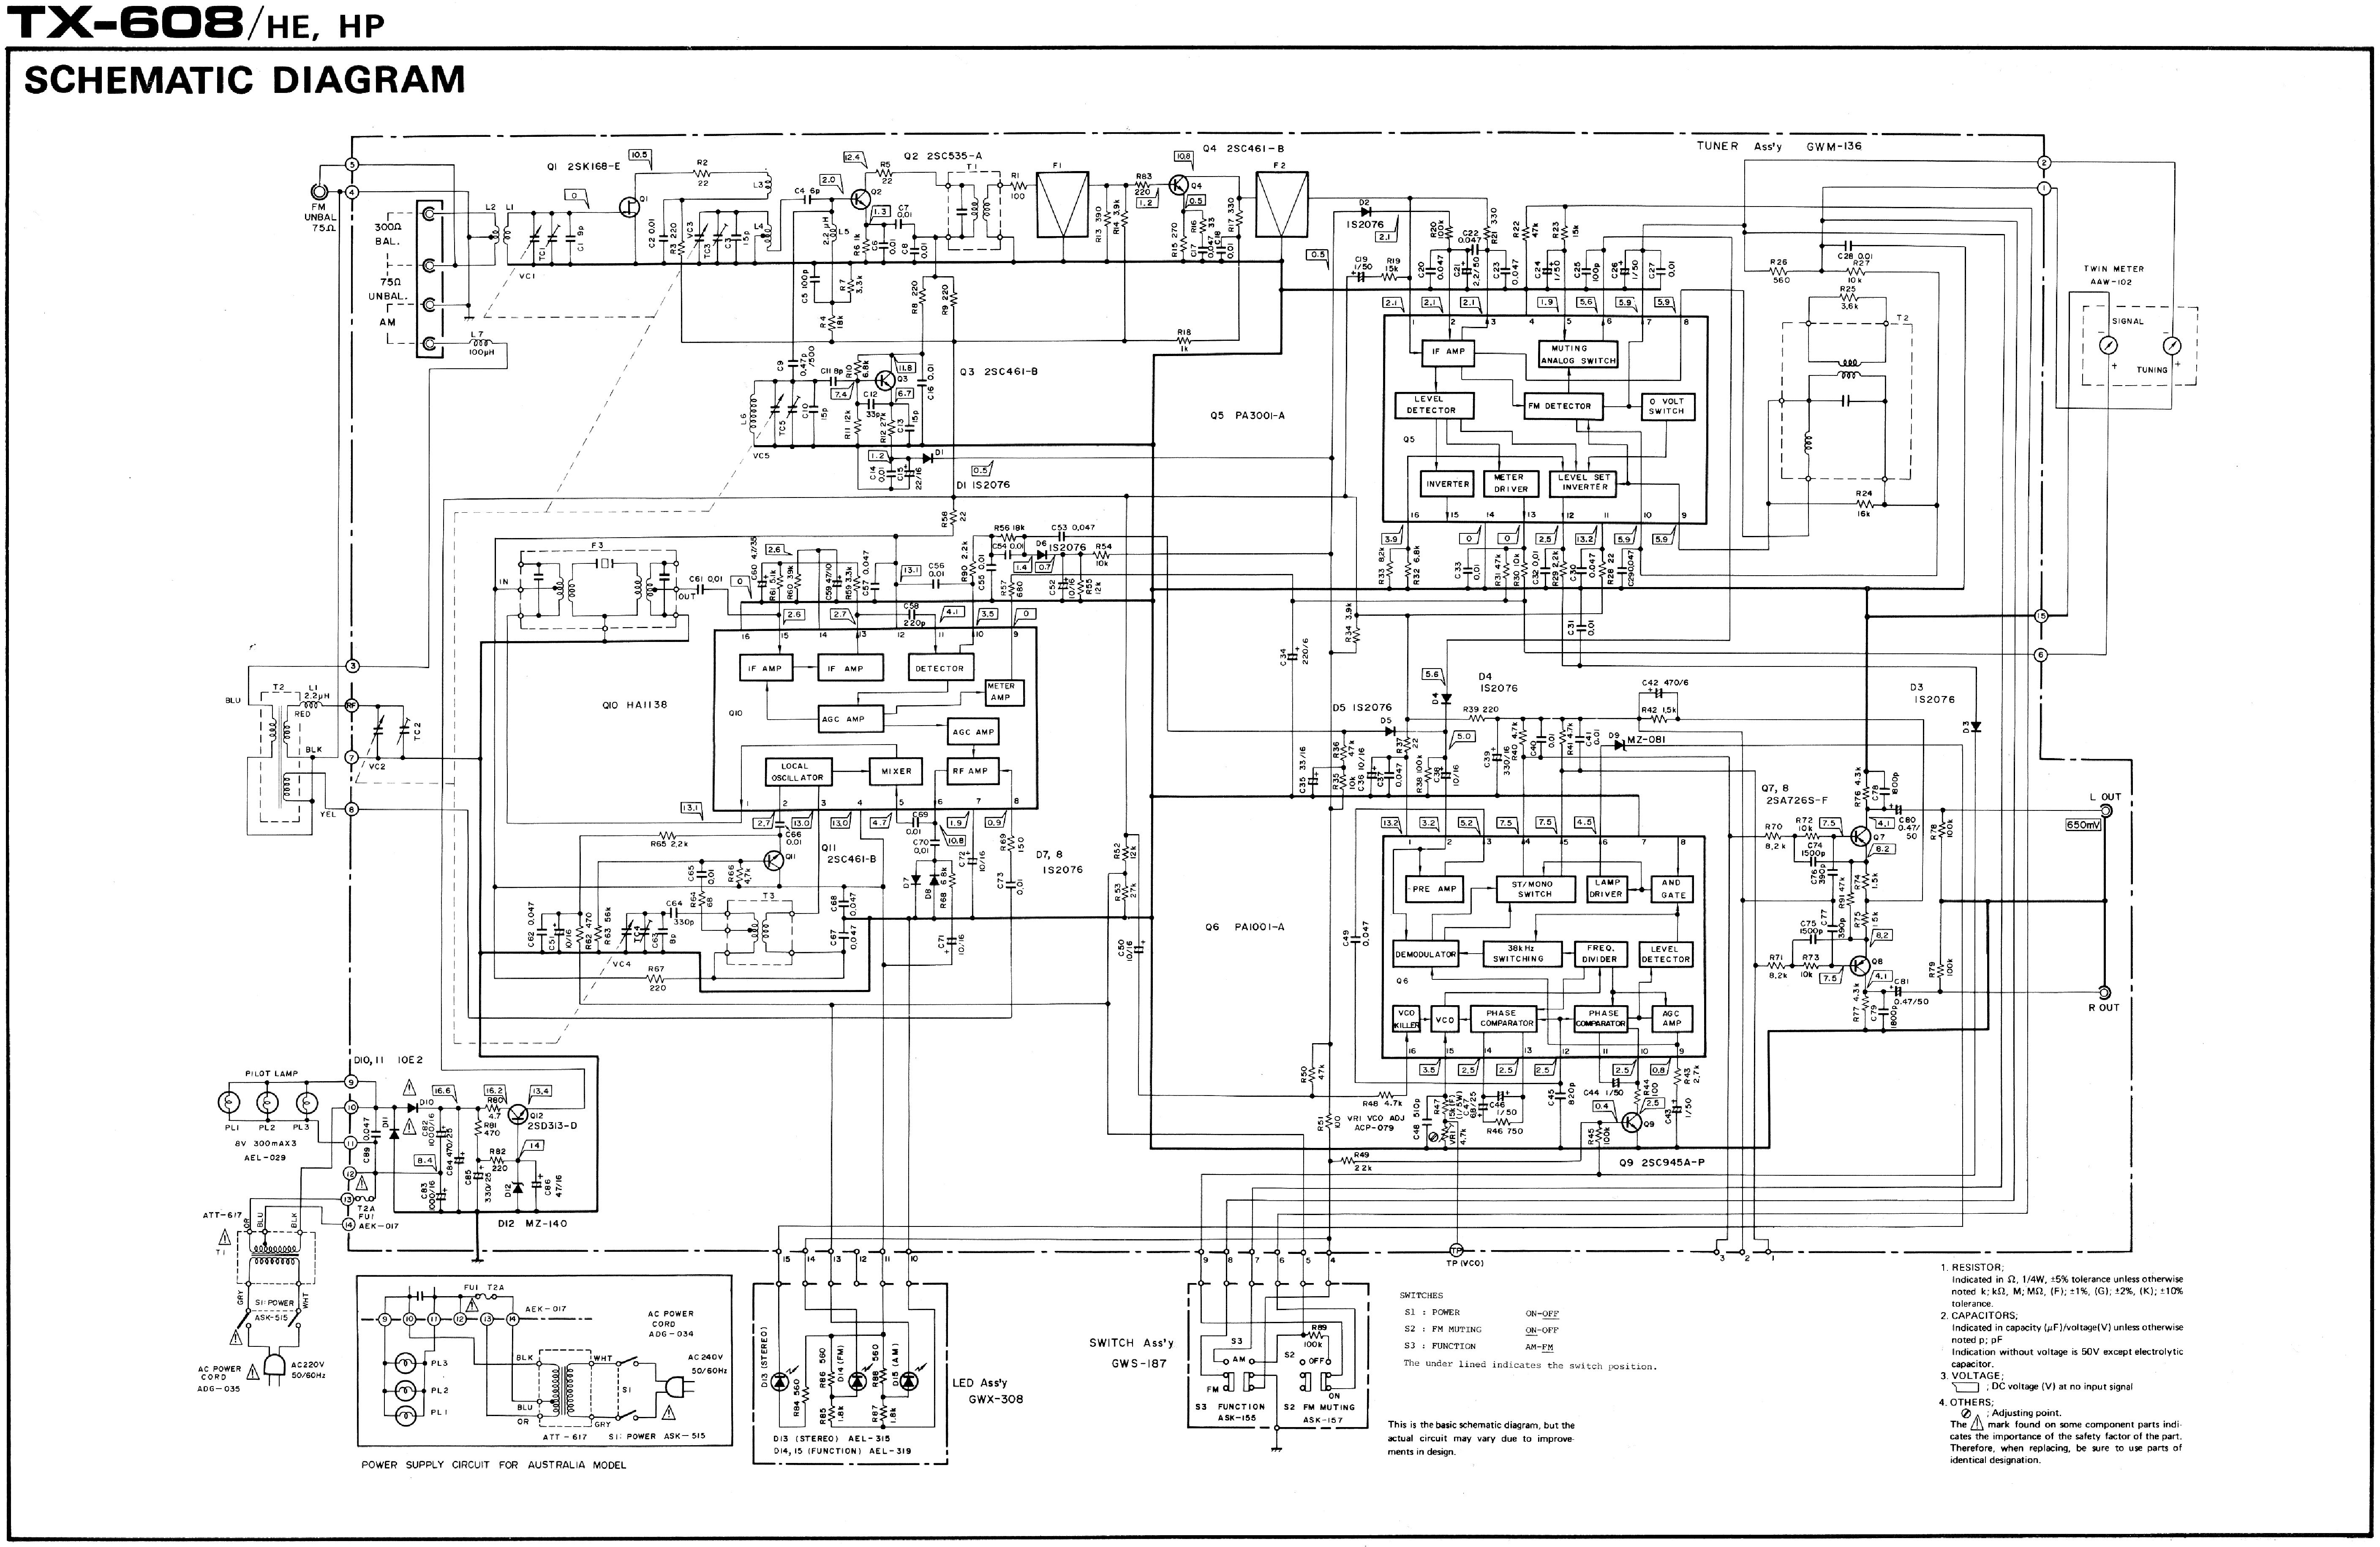 PIONEER TX-608 SCH service manual (1st page)